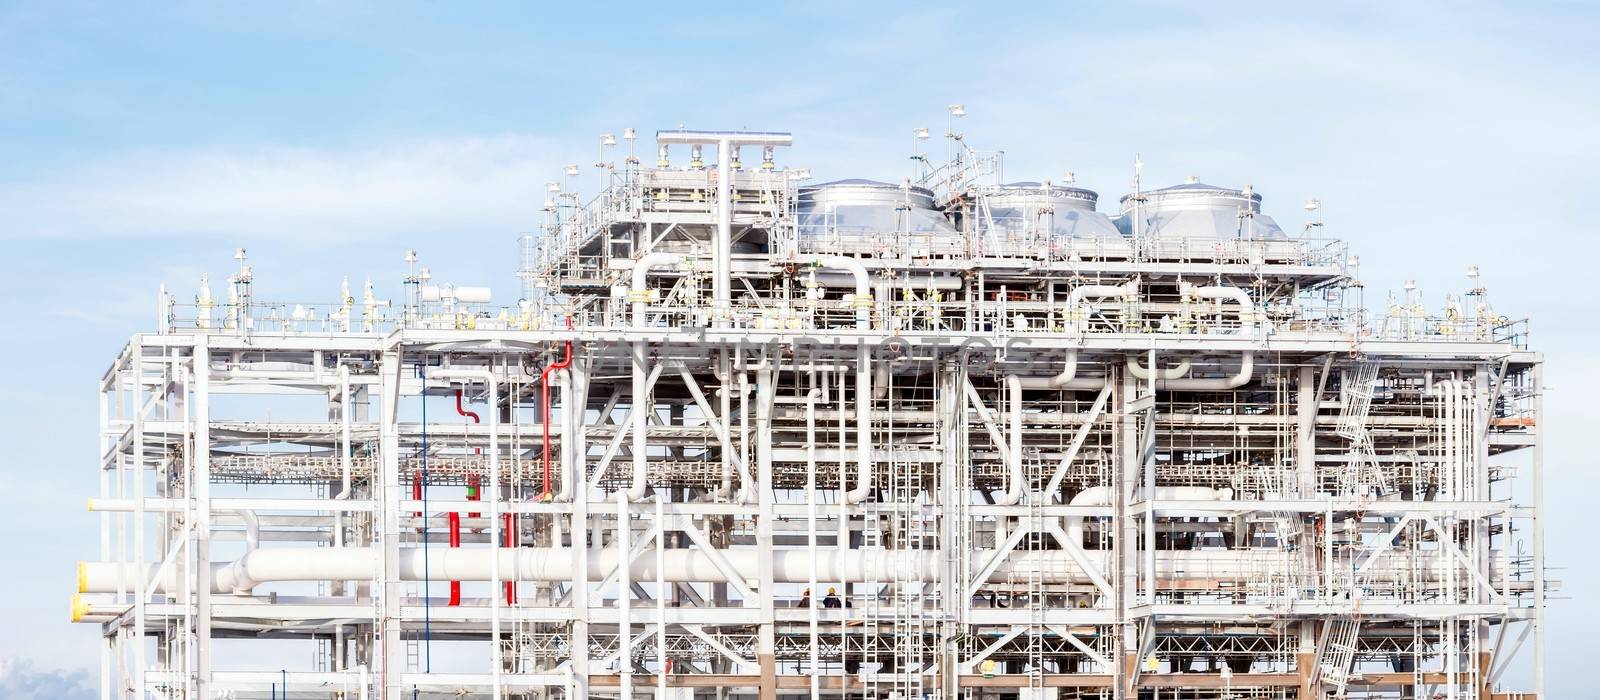 Panorama Assembling of liquefied natural gas Refinery Factory with LNG storage tank using for Oil and gas industry background